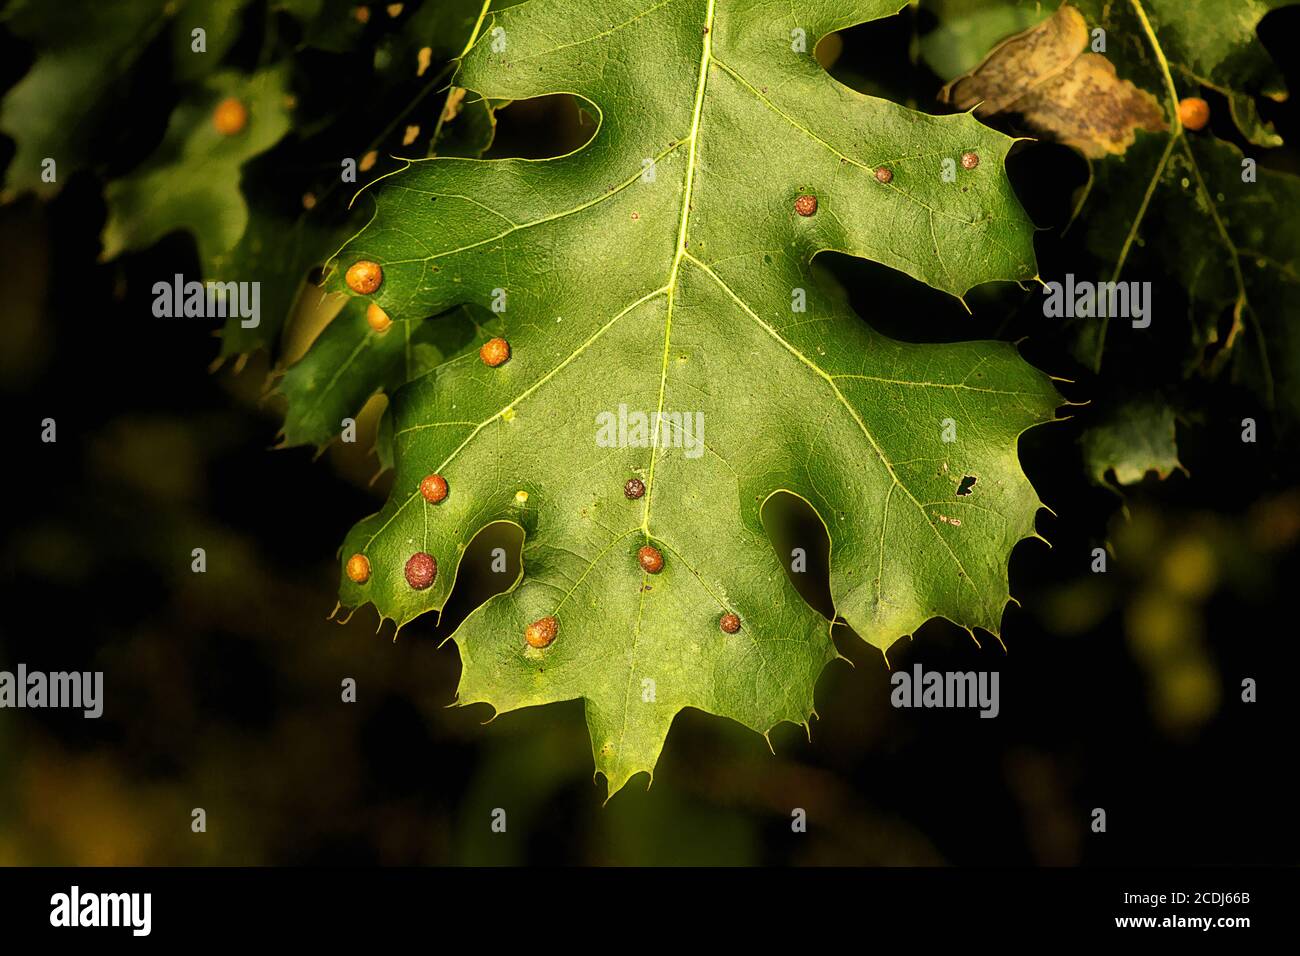 Usually Harmless Bumps on Maple Leaf Stock Photo